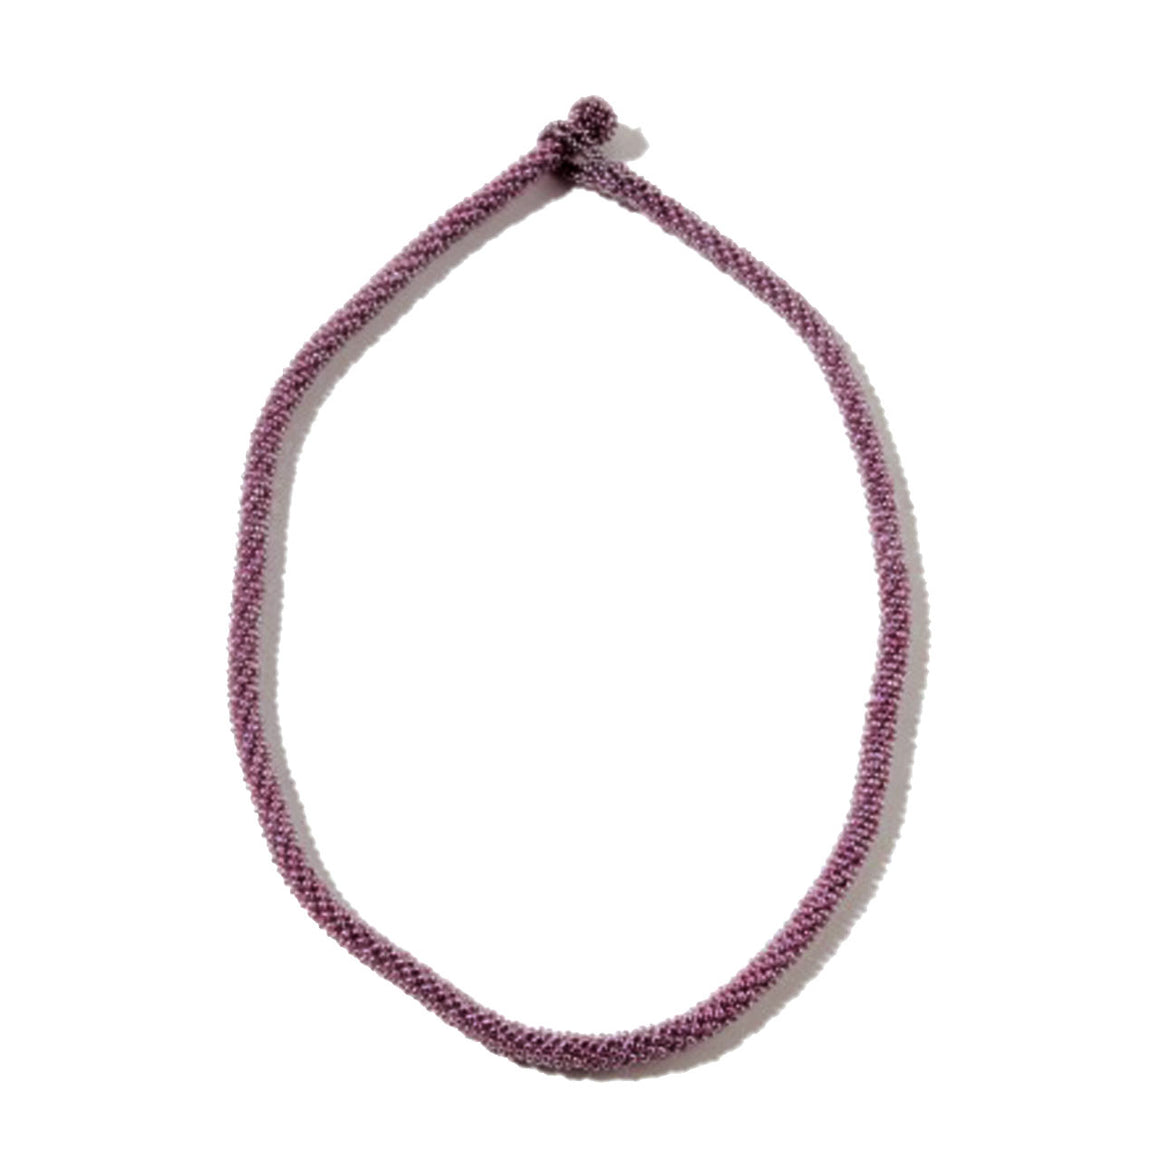 Hand Crocheted Purple Coloured Glass Bead Necklace 19.5 inches or 24 inch Length